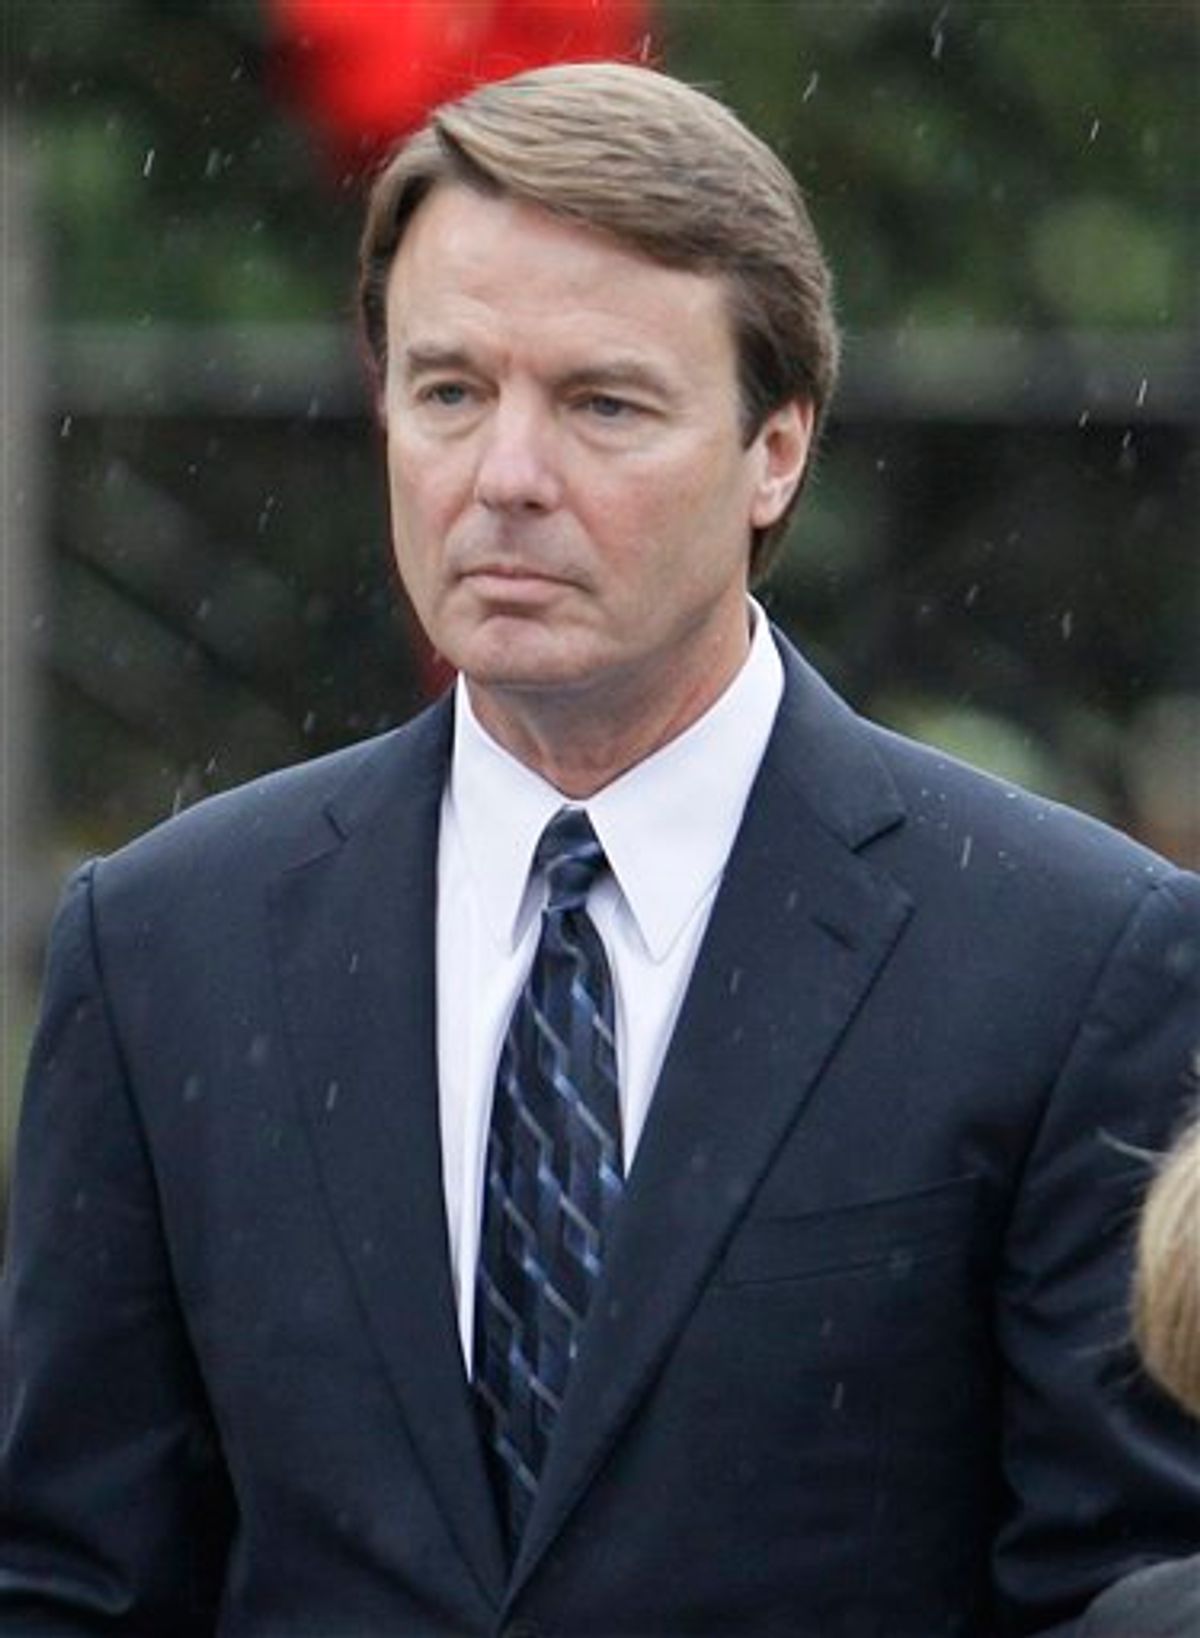 FILE - In this Dec. 11, 2010 file photo, former Democratic presidential candidate John Edwards is seen in Raleigh, N.C. Edwards and federal prosecutors are arguing over whether the money used to cover up his extramarital affair was a campaign contribution or just a gift from his old friends. An indictment of the 2004 Democratic vice presidential nominee appears imminent, but people on both sides still hold out hope for a last-minute deal for a guilty plea to a negotiated charge.  (AP Photo/Gerry Broome, File) (AP)